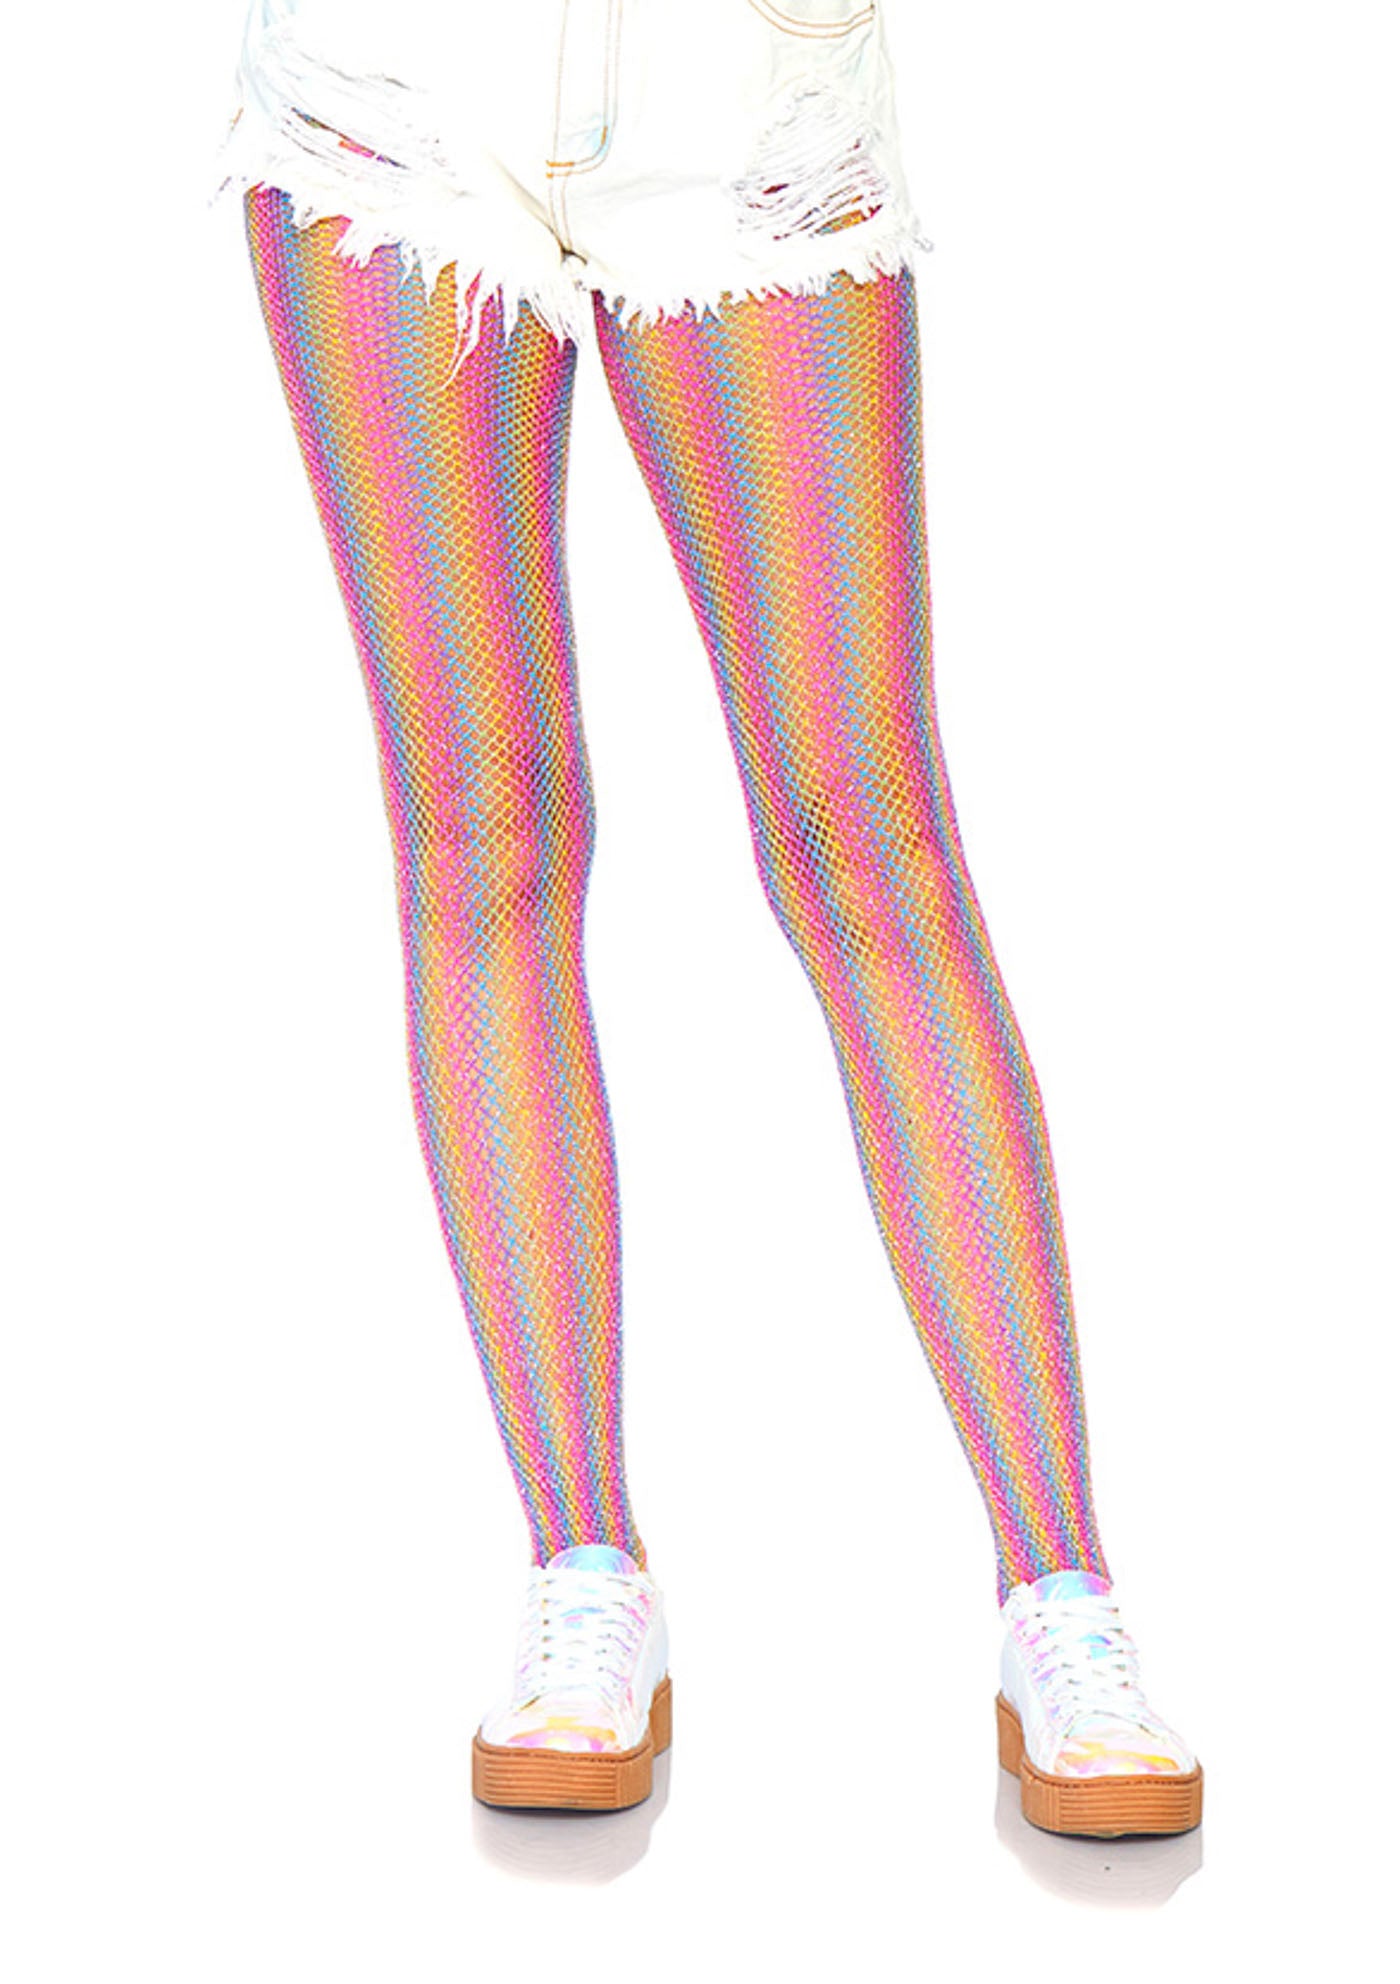 Leg Avenue 9308 Lurex Rainbow Fishnet Tights - Micro fishnet sparkly glitter tights with vertical rainbow coloured stripes.